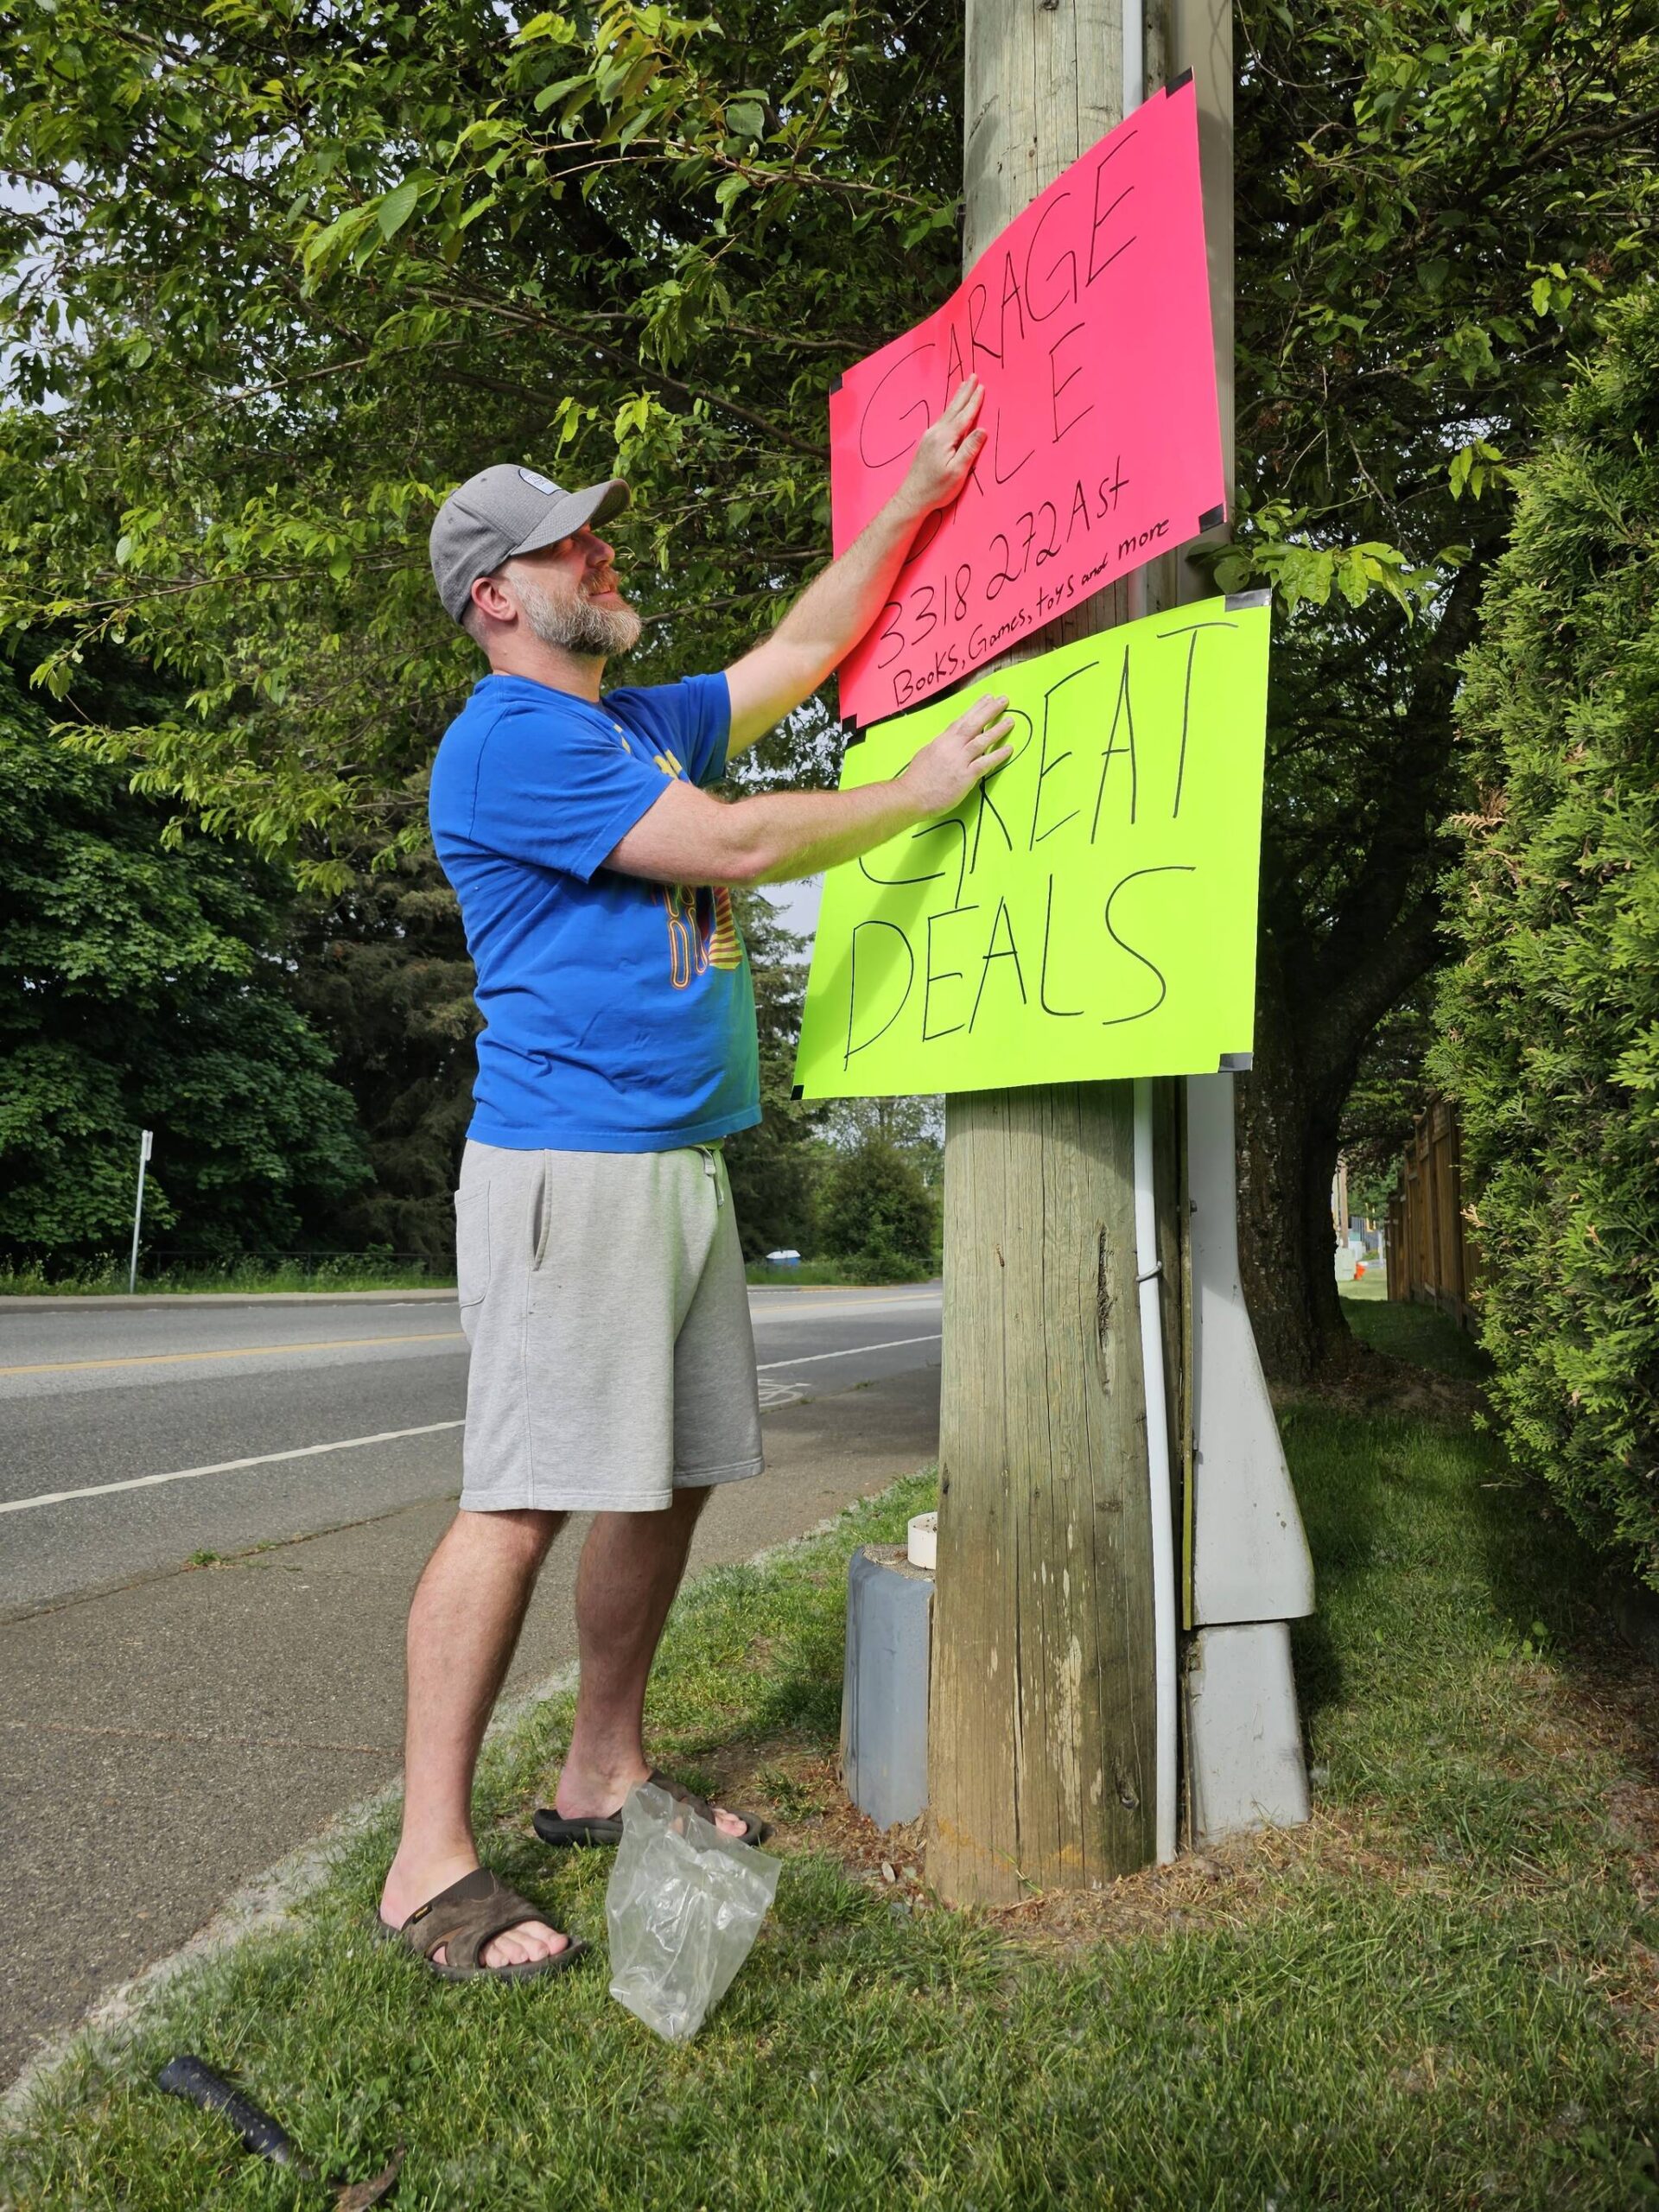 Aldergrove resident Ken Boulter was putting up signs at the turnoff to his garage sale on Saturday, May 27.(Dan Ferguson/Langley Advance Times)